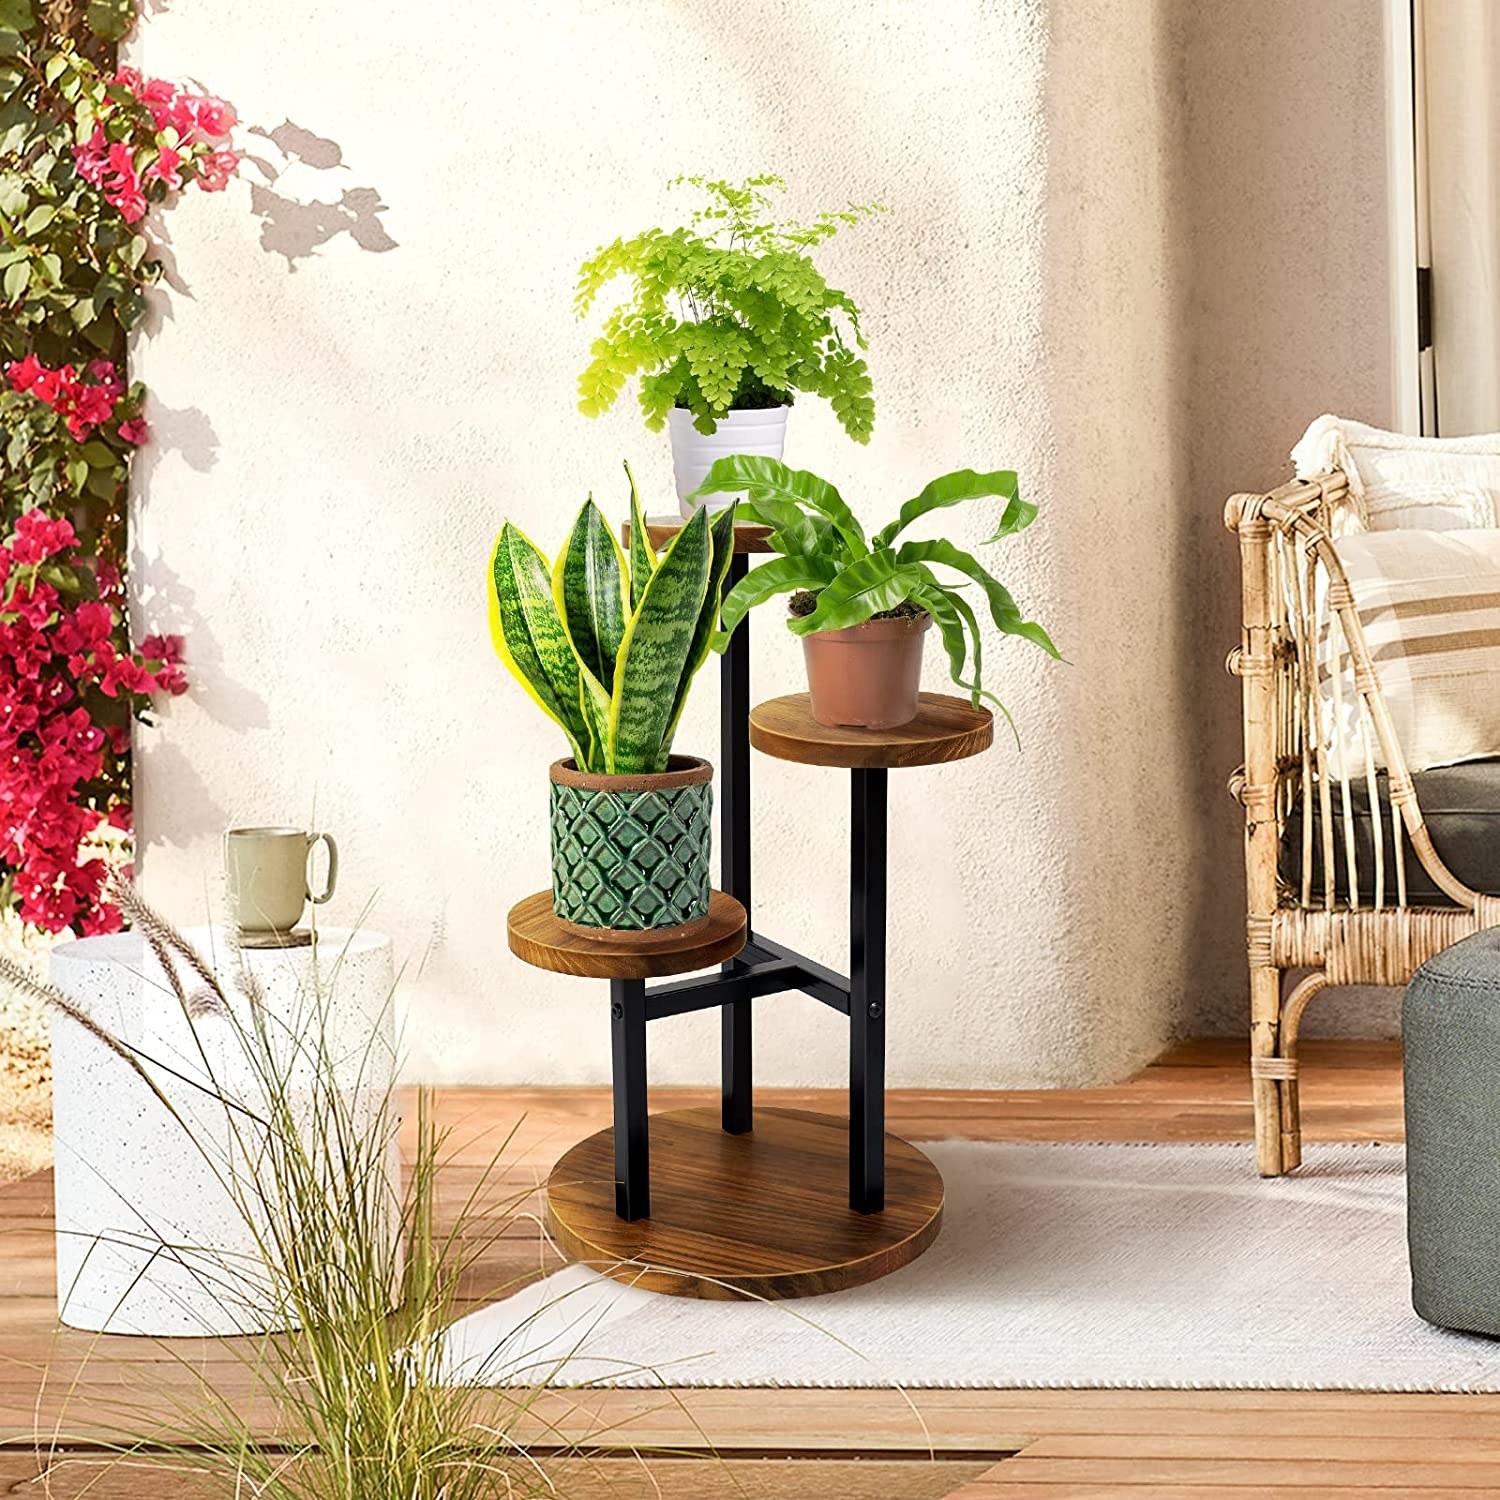 The plant stand with three plants on each tier